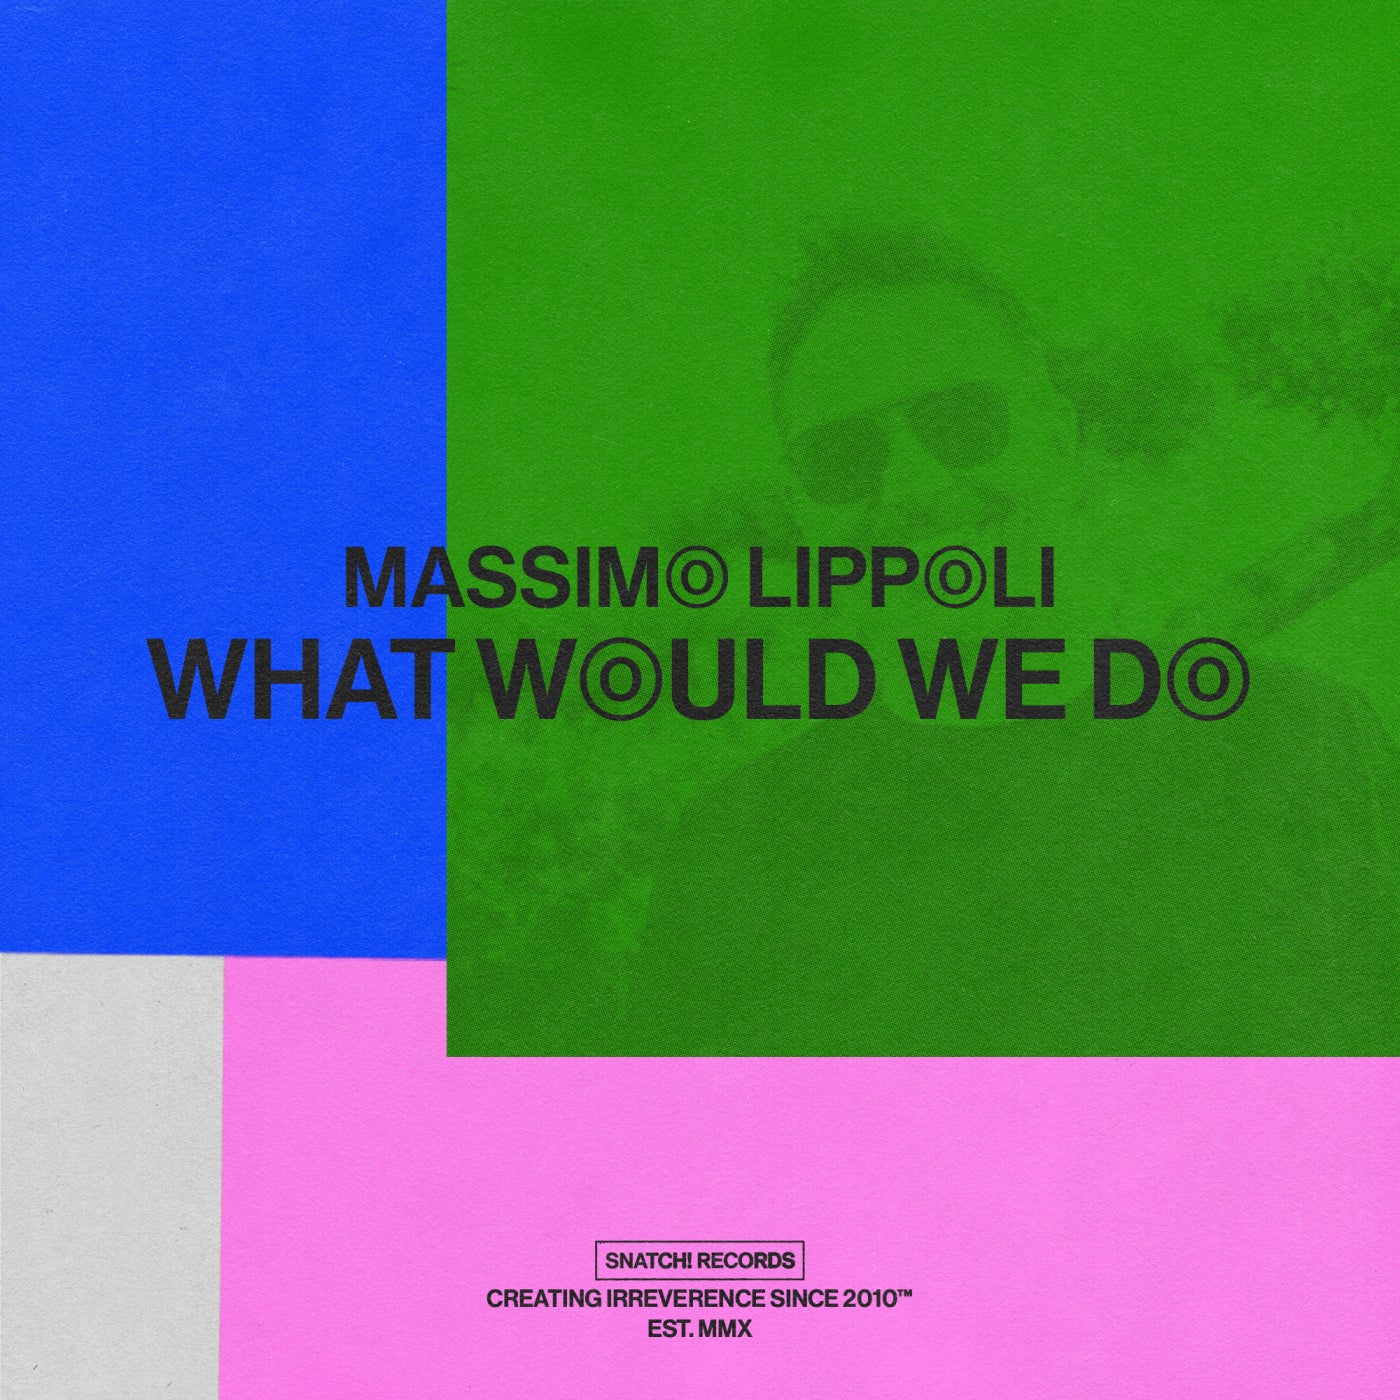 image cover: Massimo Lippoli - What Would We Do on Snatch! Records